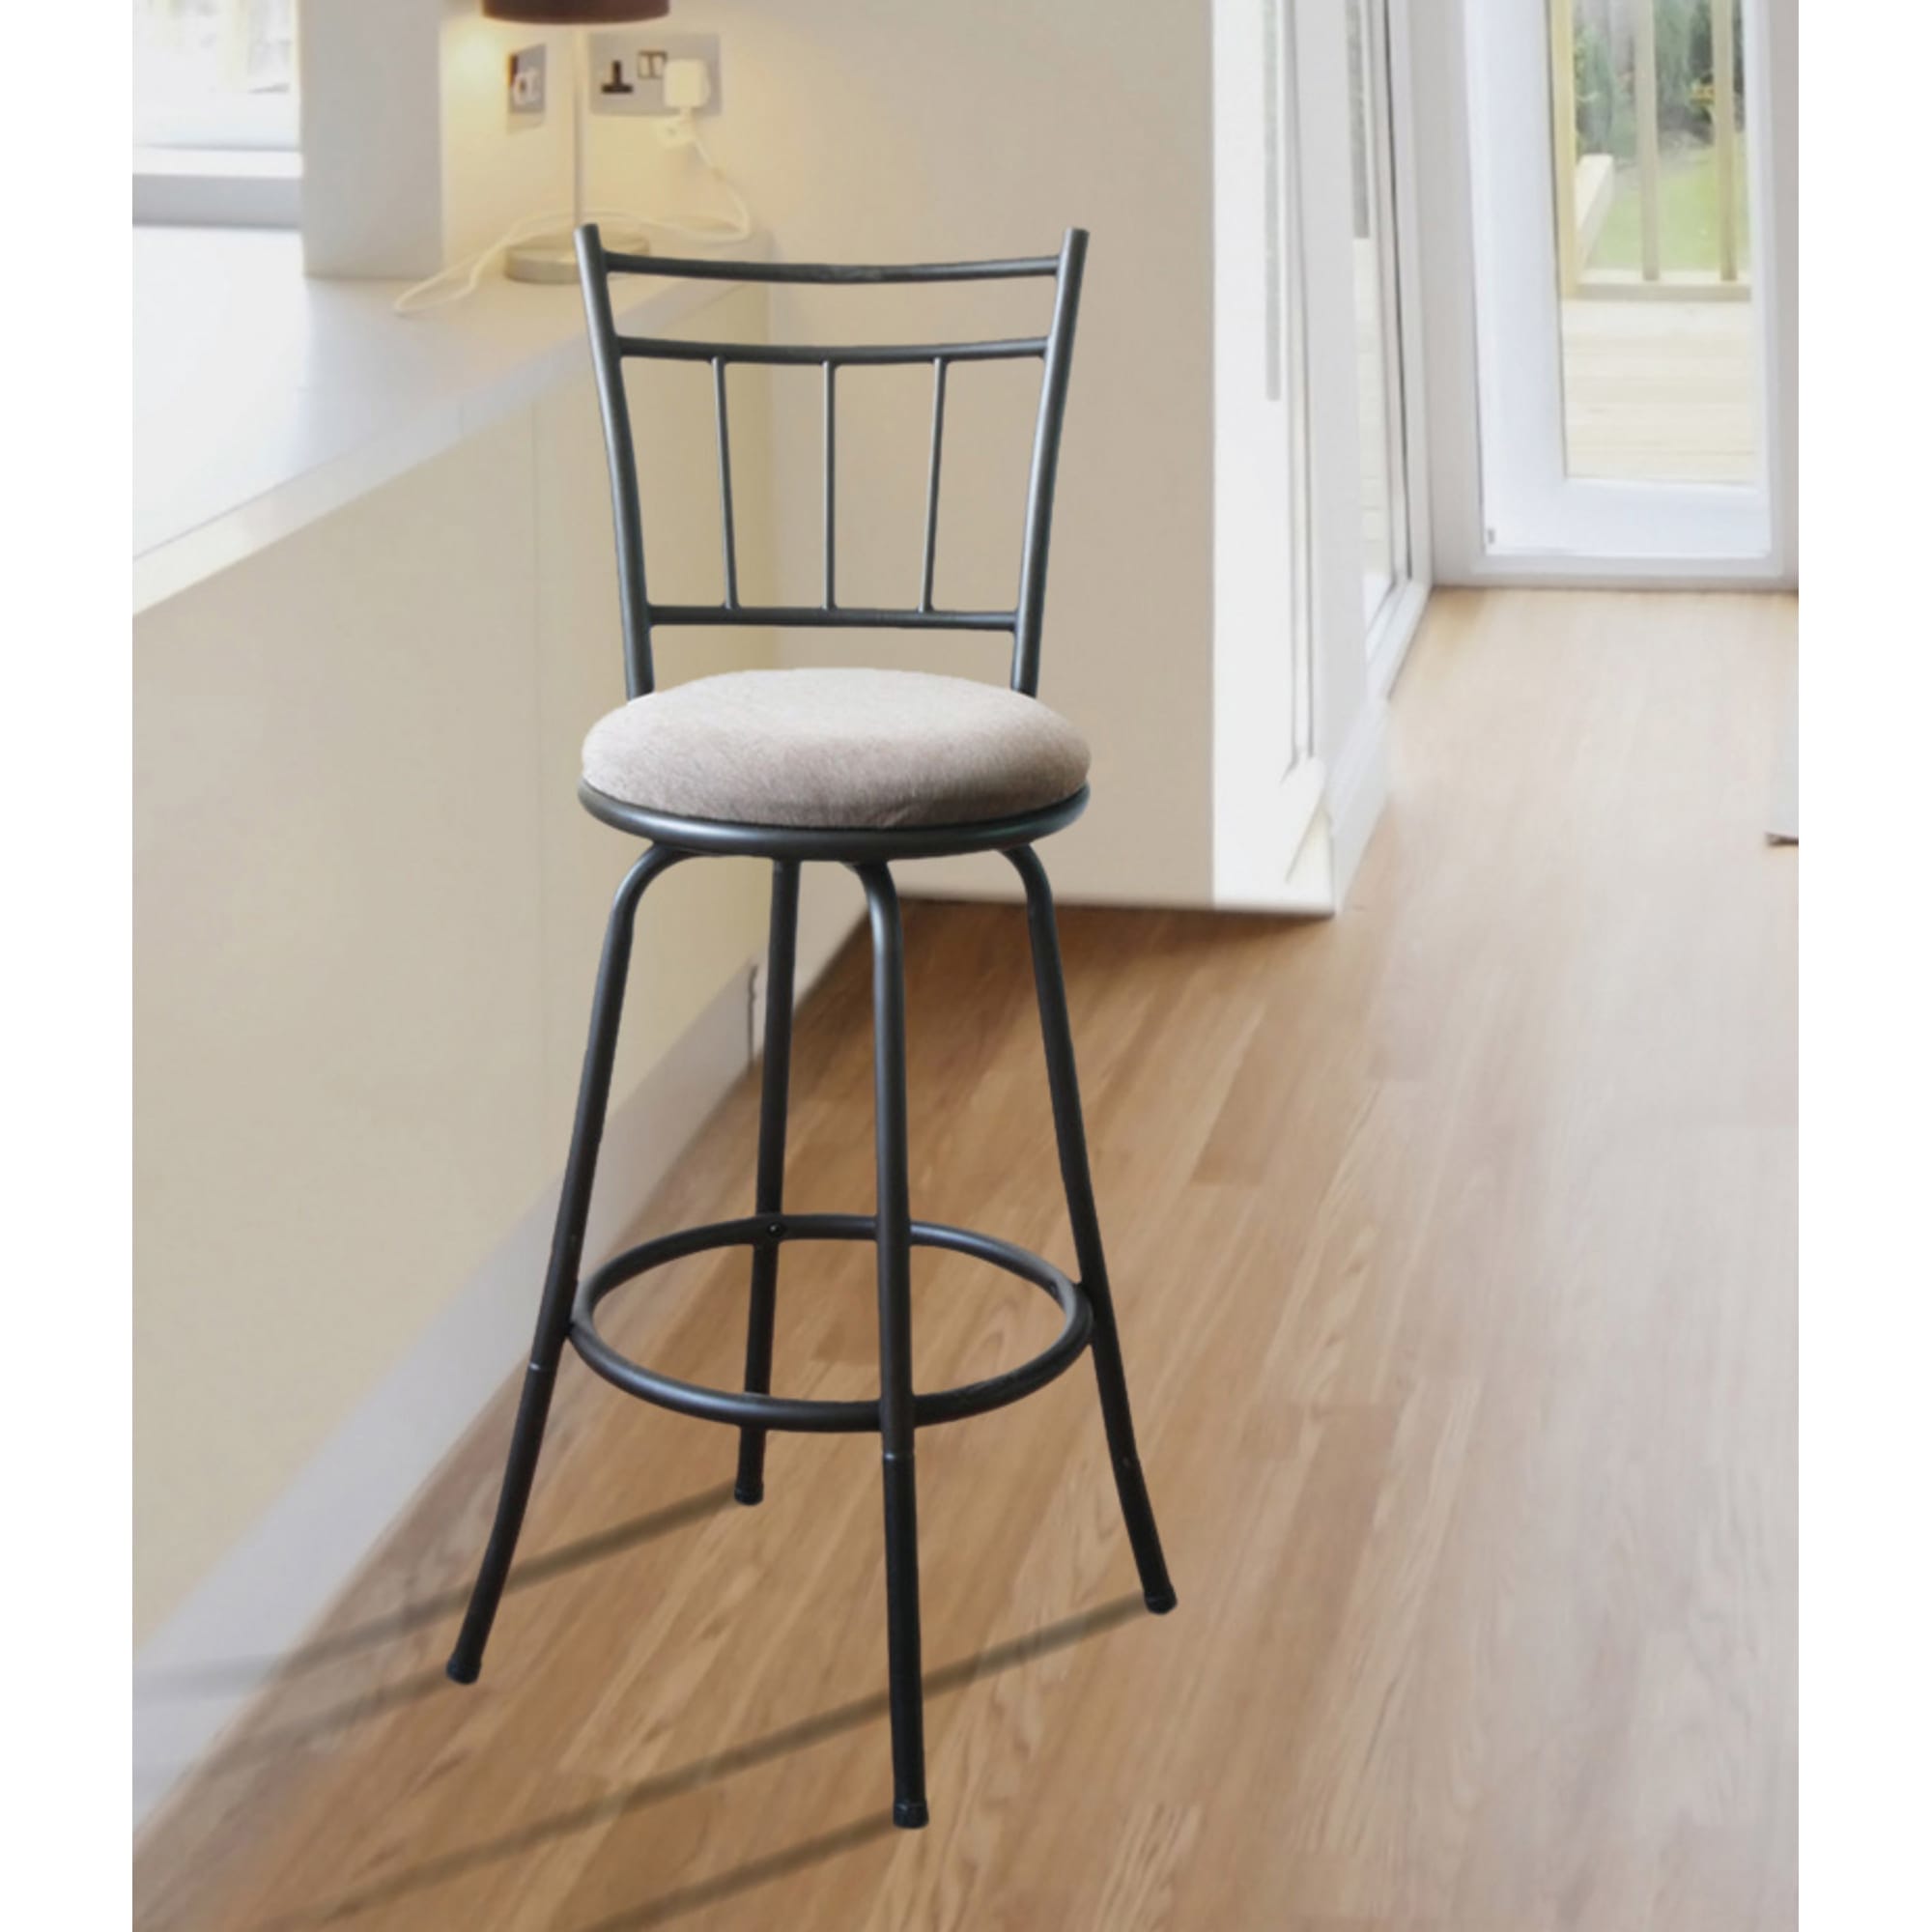 Home Basics Squared Swivel Top Bar Stool with Cushioned Seat, Bronze $40 EACH, CASE PACK OF 1